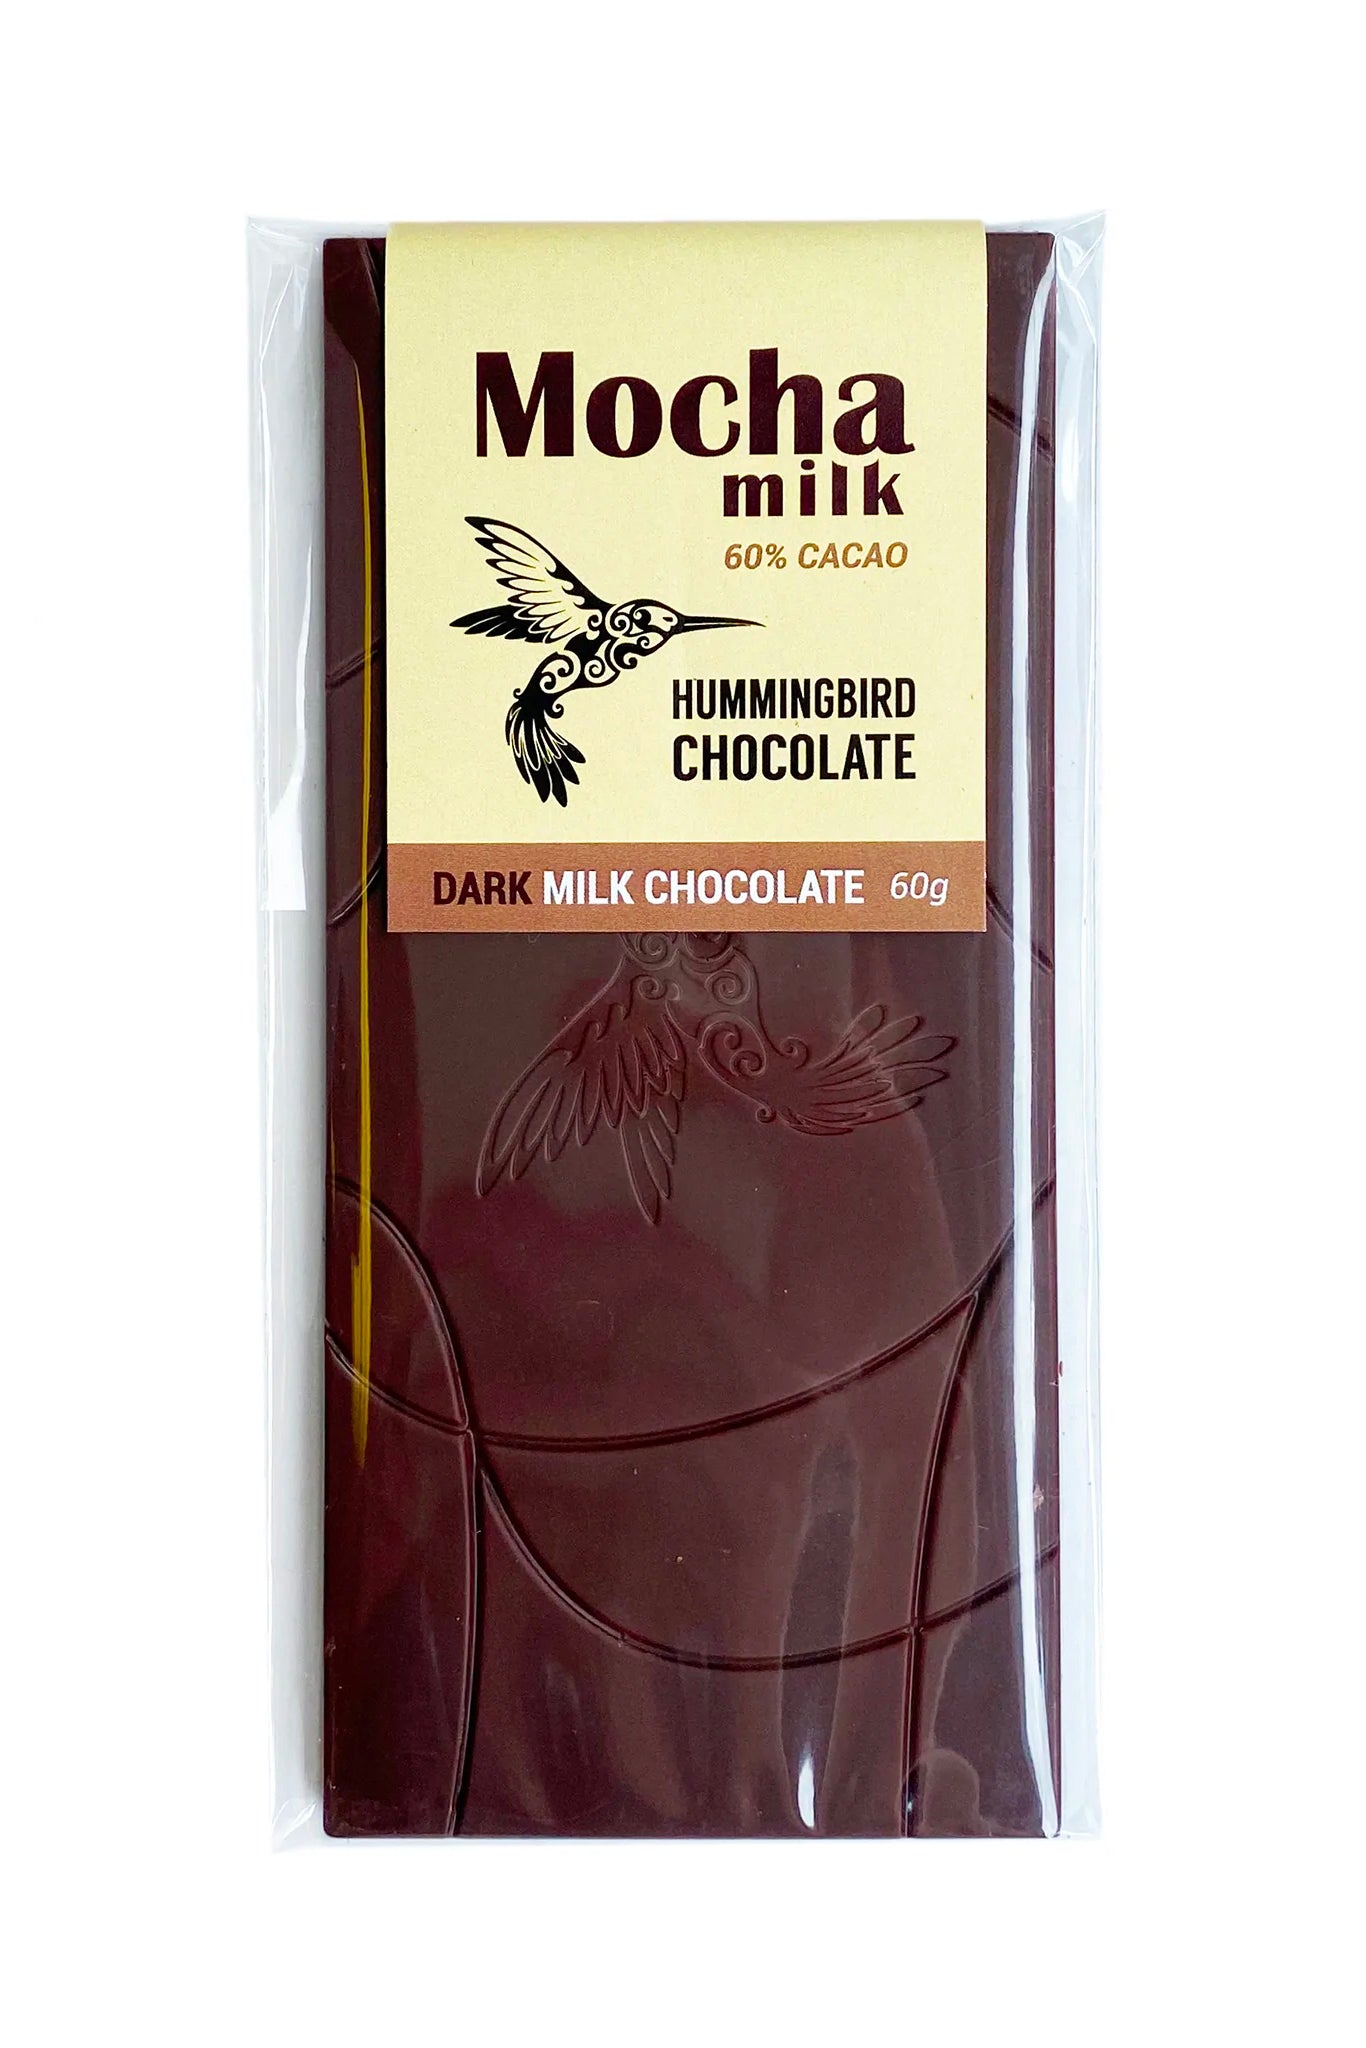 Mocha Milk 60% - in store pick up only